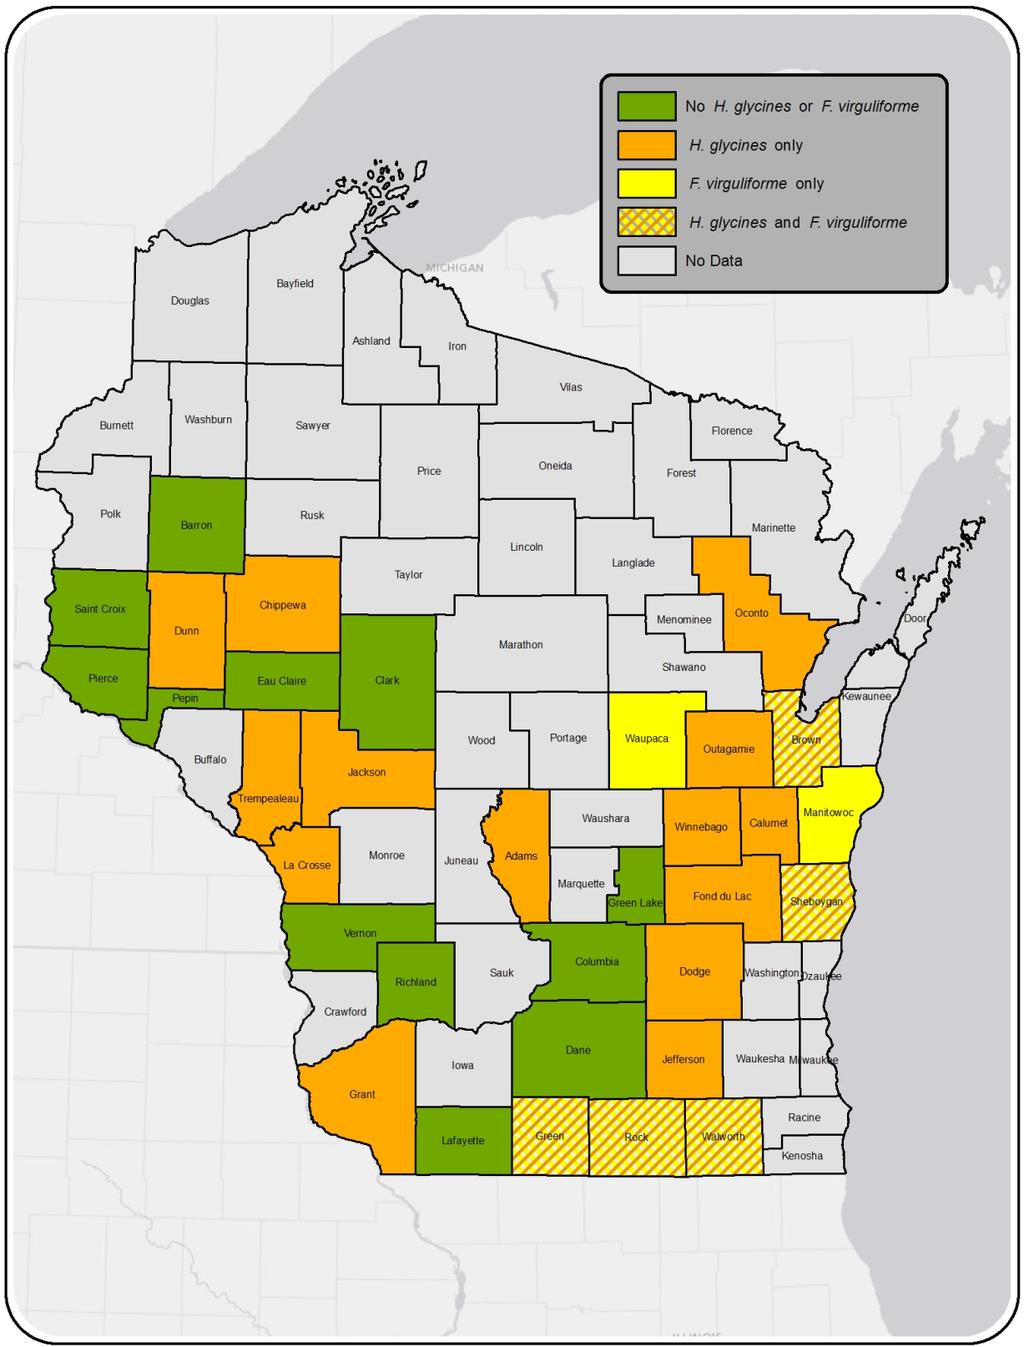 FIGURE 3 Wisconsin counties where soil samples were submitted from soybean fields that tested positive for Heterodera glycines (orange shading), Fusarium virguliforme (yellow shading), both H.